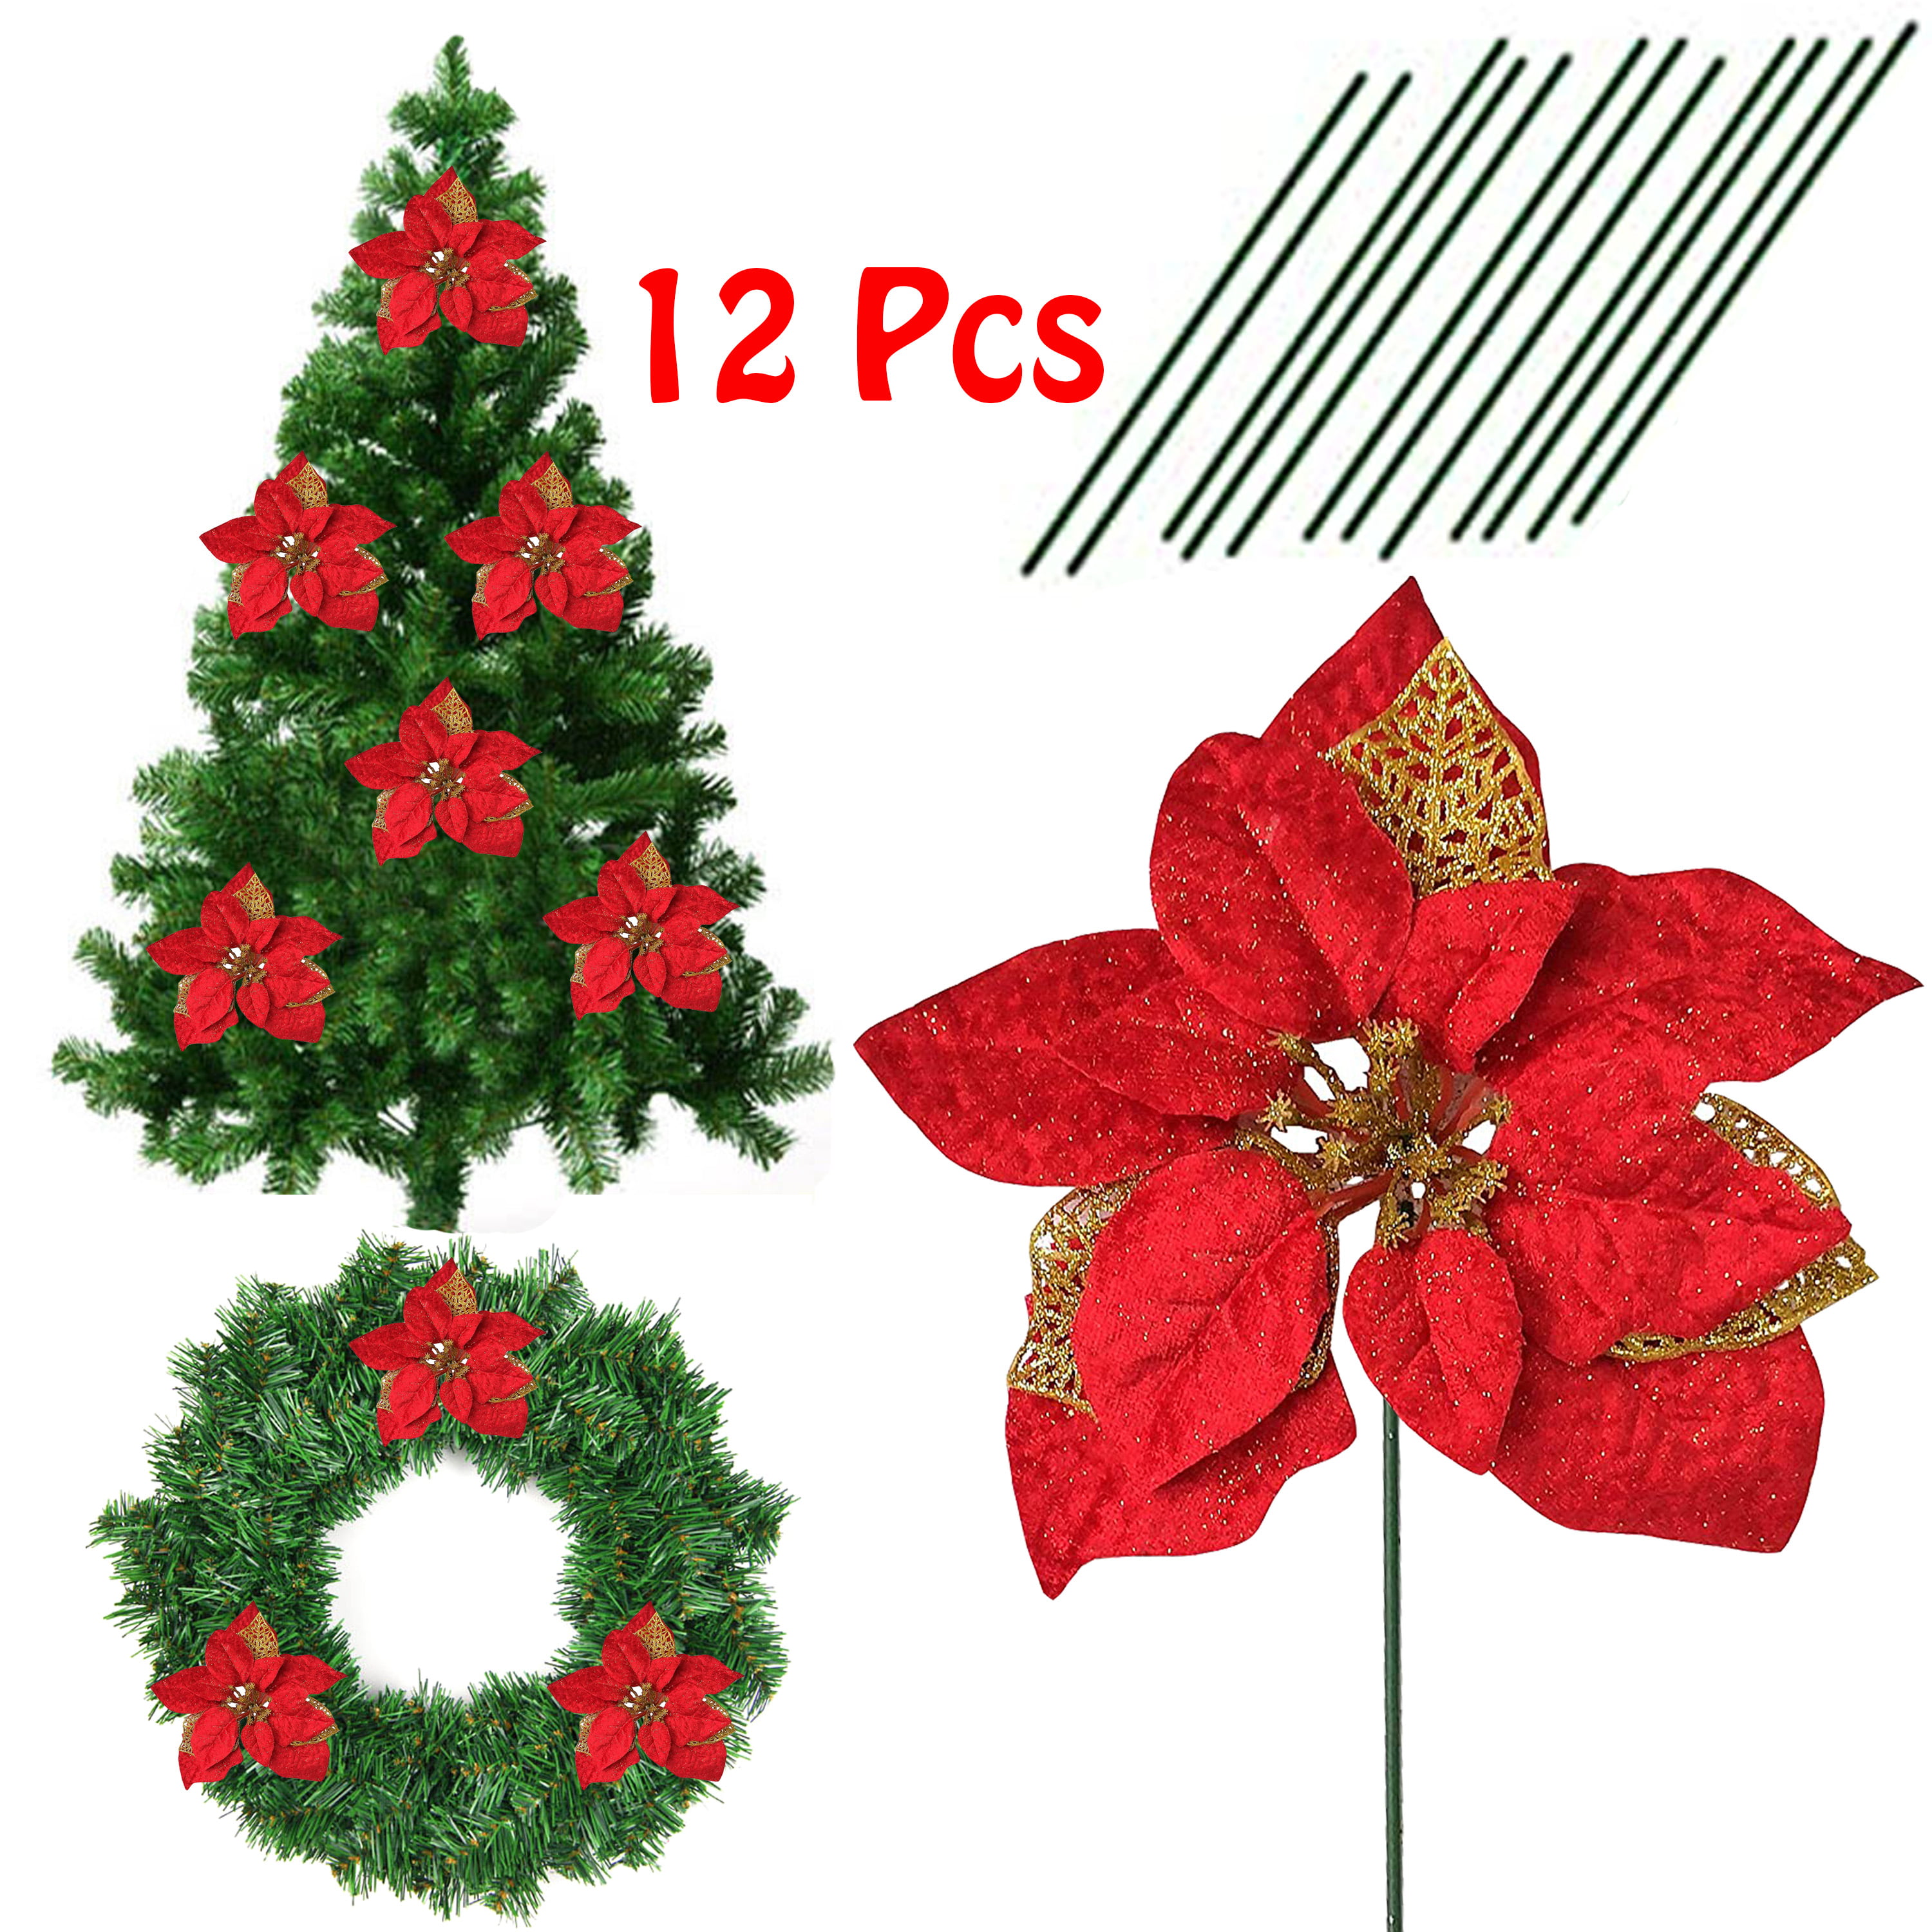 FLASH WORLD 8PCS 9.5 Christmas Glitter Poinsettia Flowers Christmas Artificial Flowers Ornaments for Xmas Tree Wreaths Garland Holiday Decorations（Gold） 